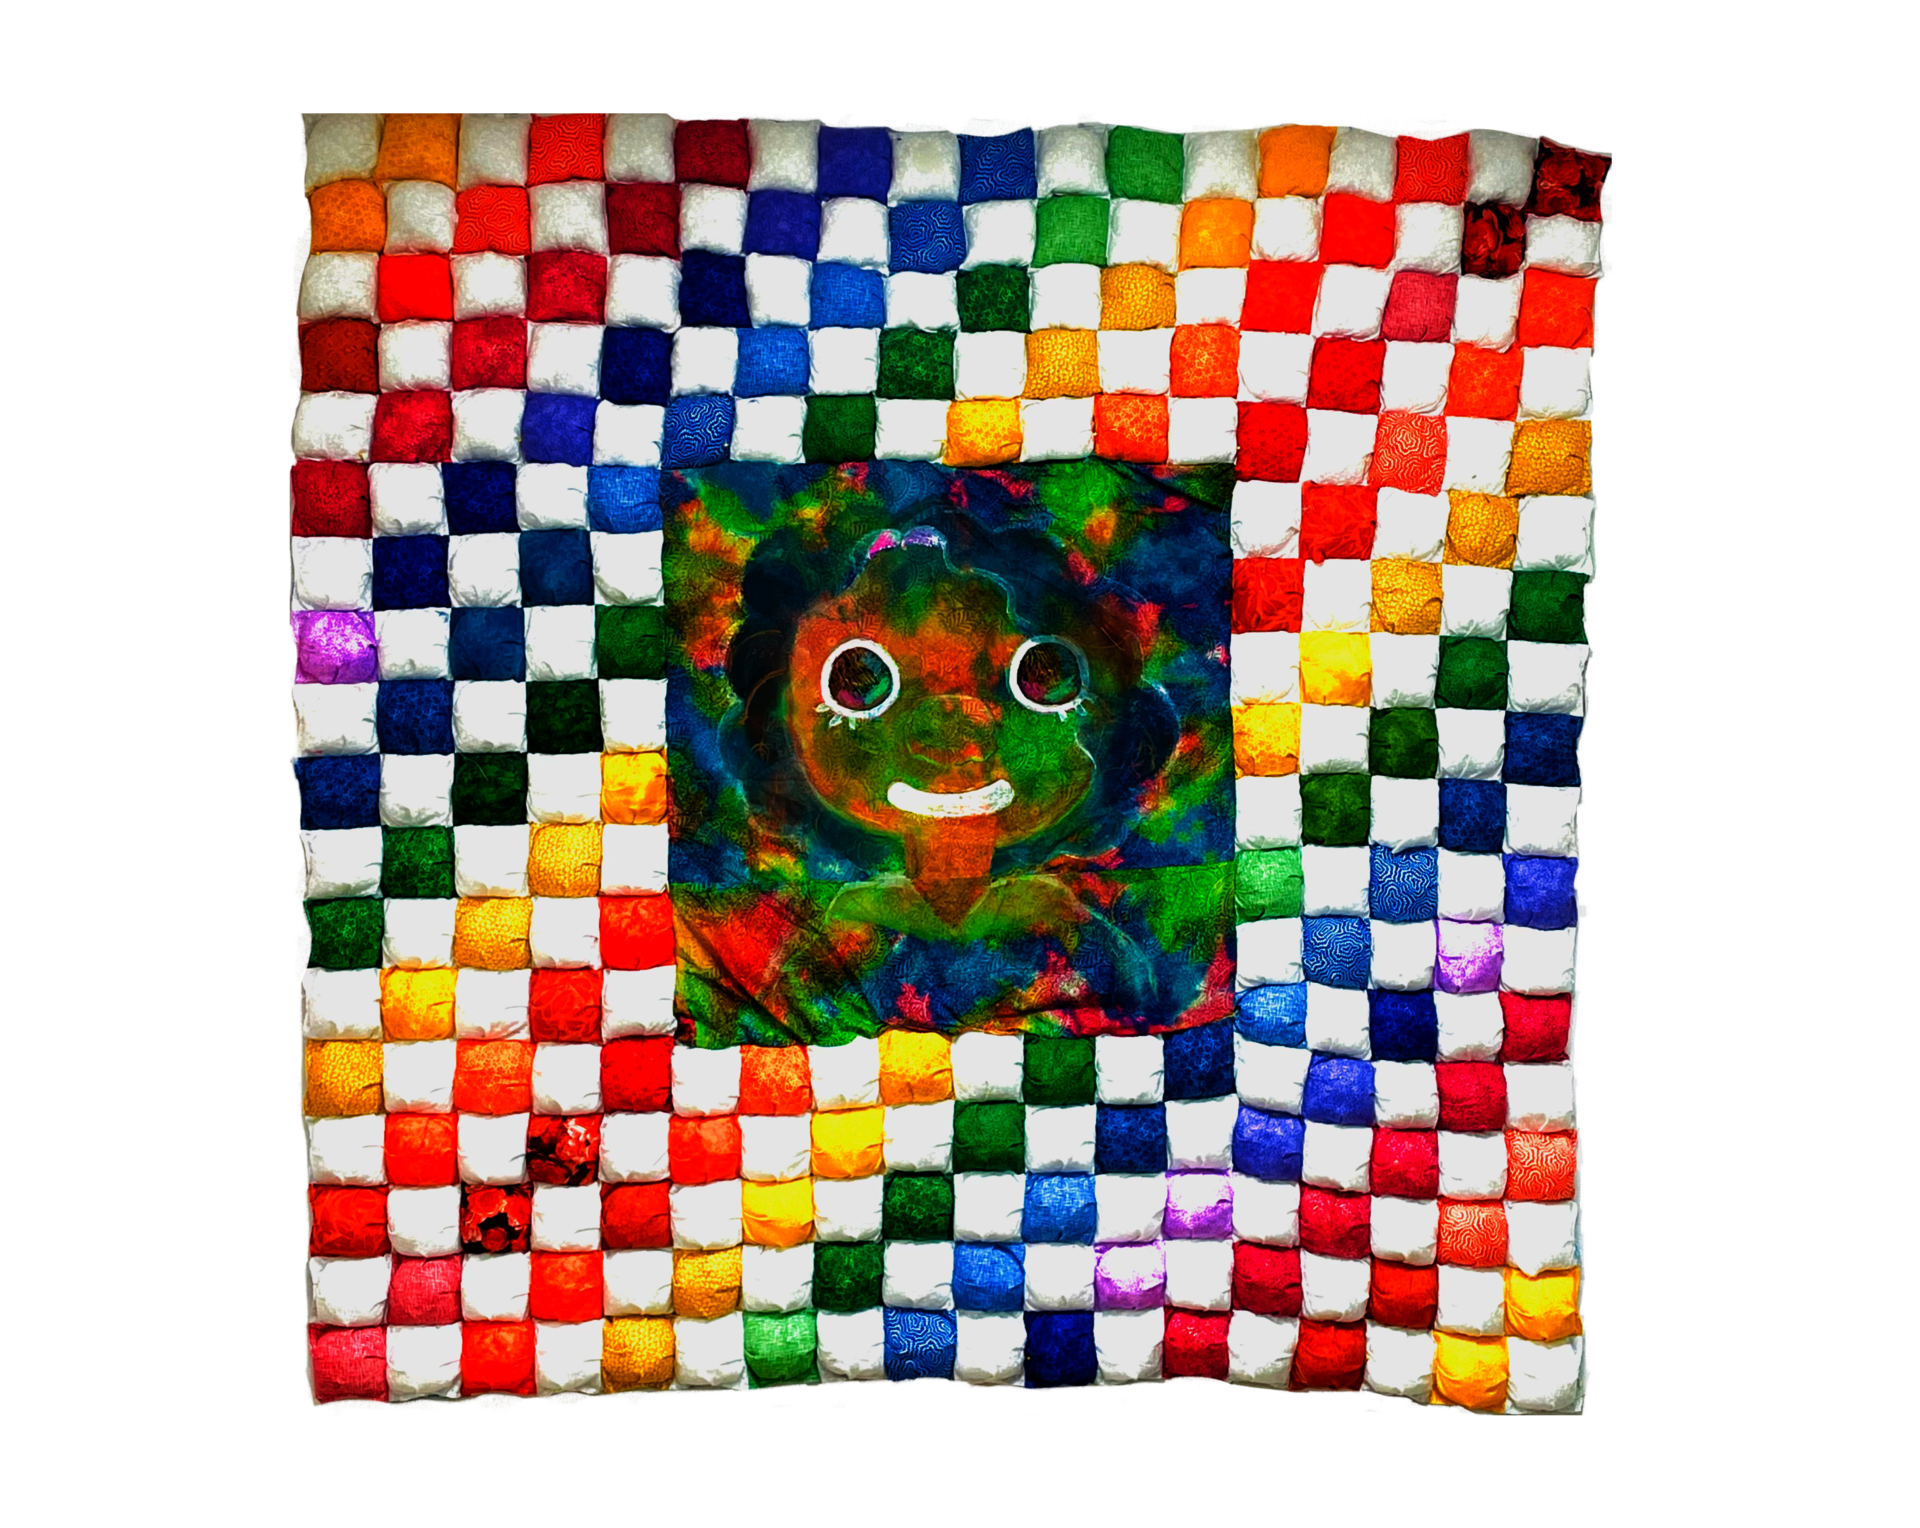 A puff quilt of white and all colors made up of many small squares. The middle of the quilt contains an image of a little girl smiling.